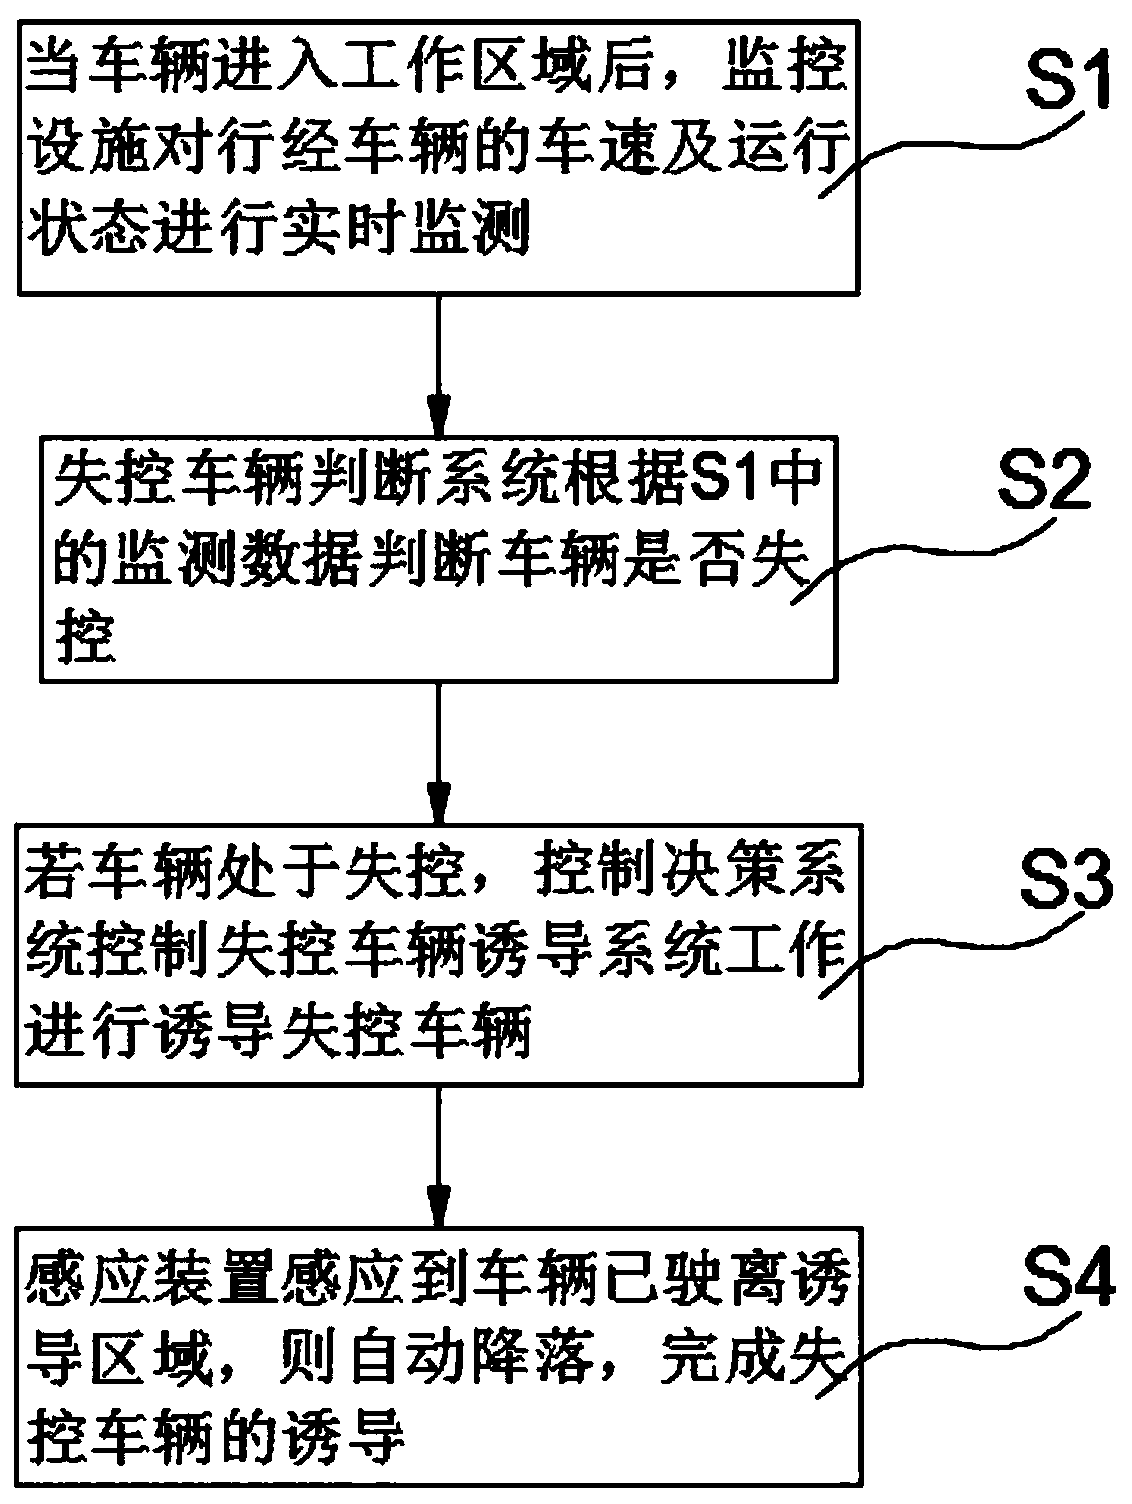 Runaway vehicle guide system and method for long downhill road section of mountain highway